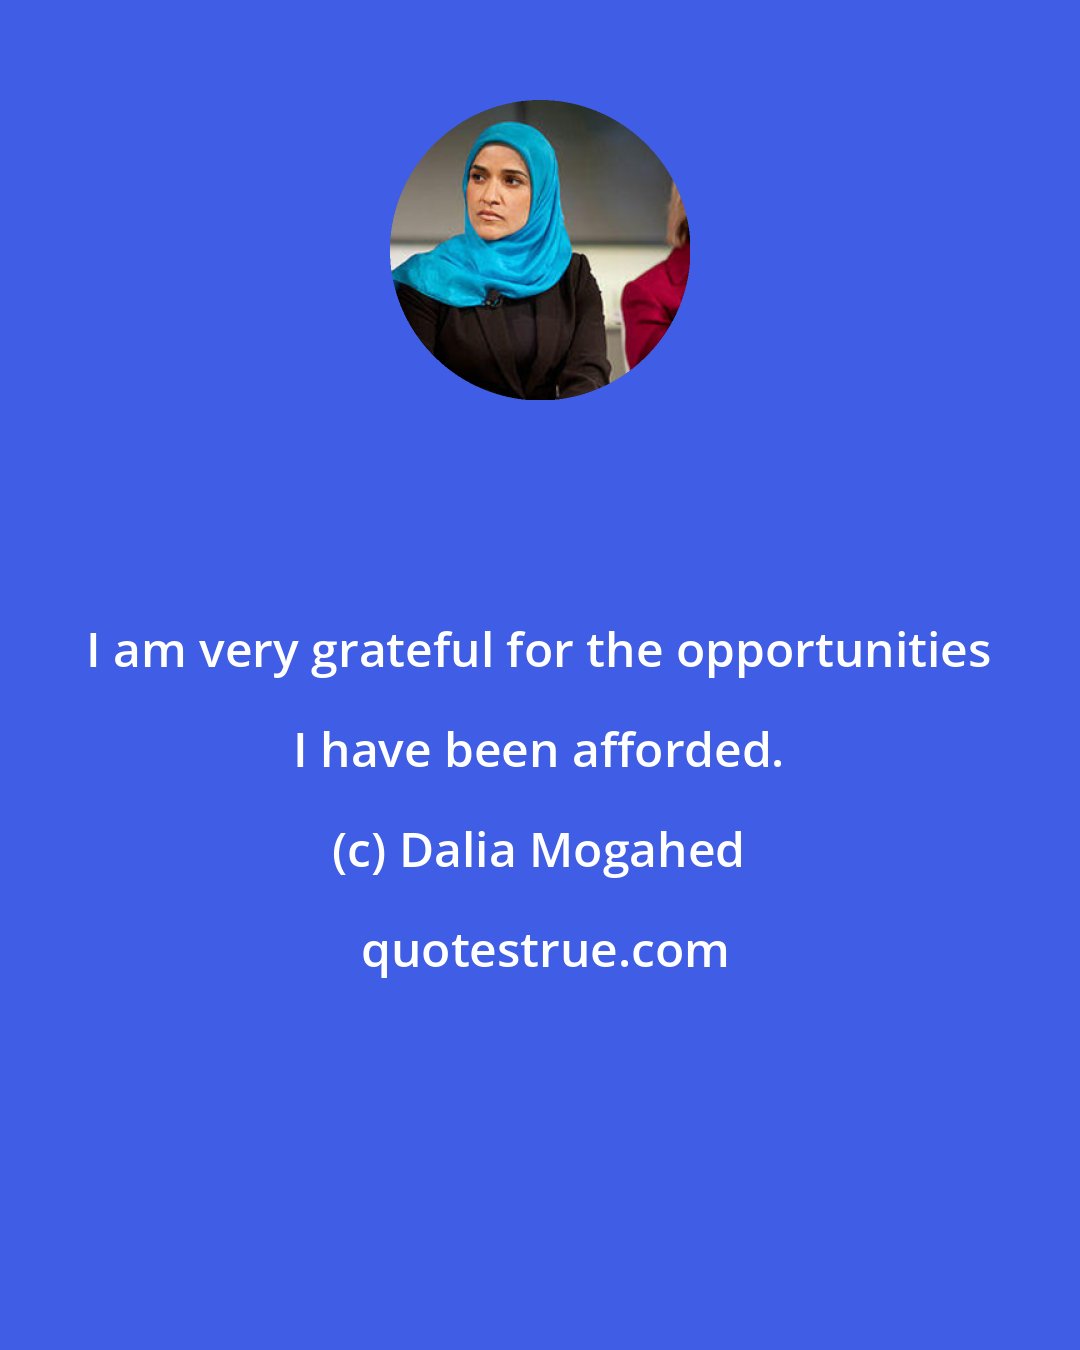 Dalia Mogahed: I am very grateful for the opportunities I have been afforded.